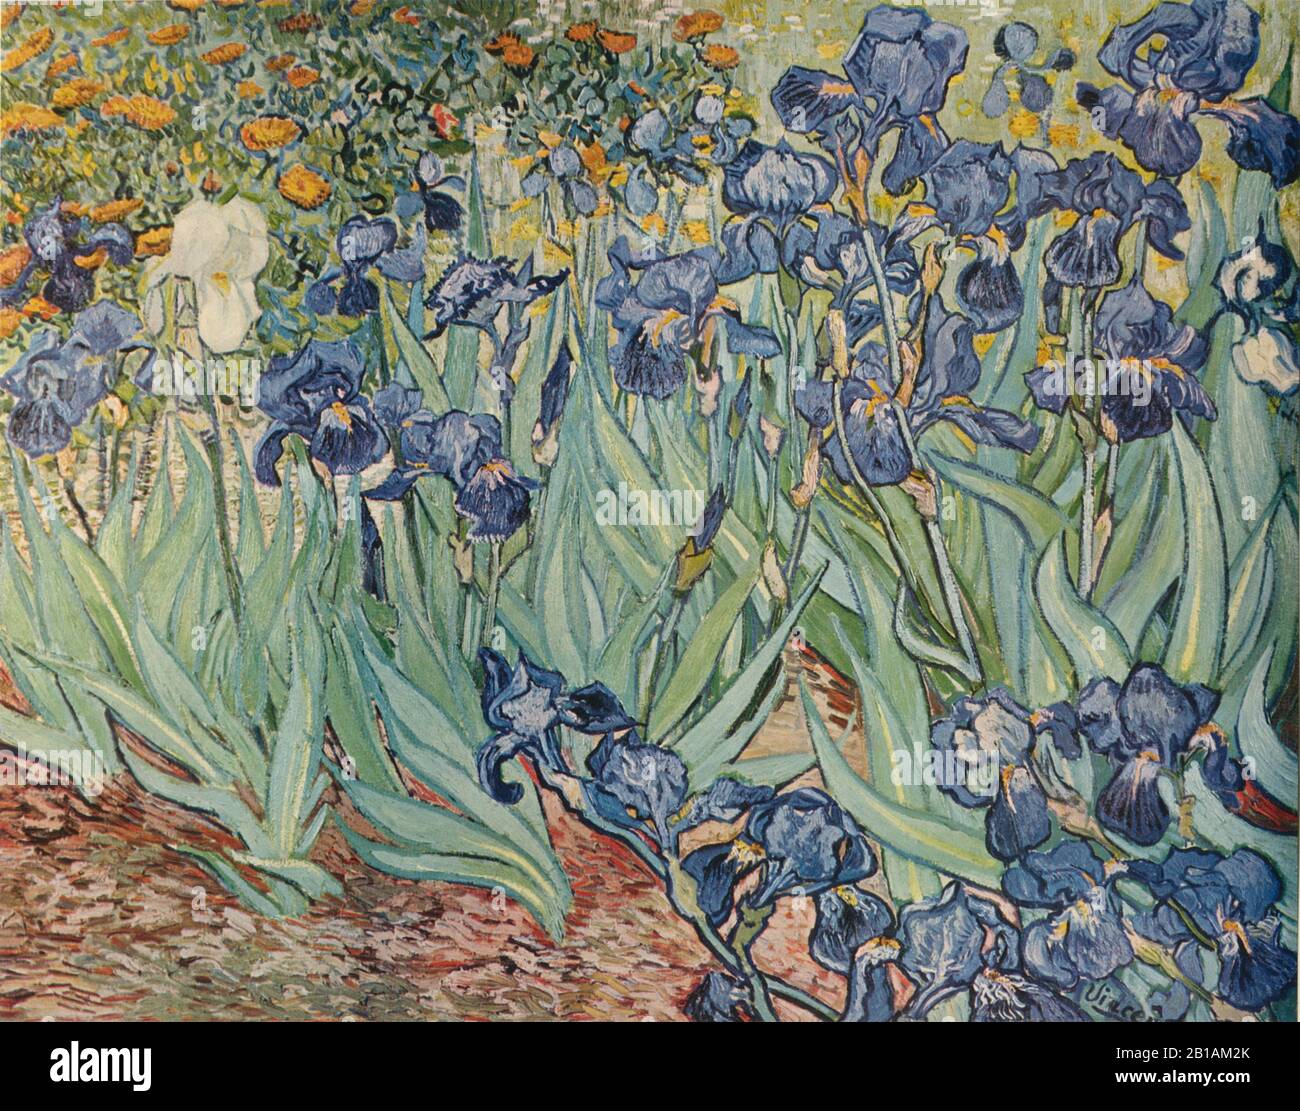 Irises 1889 painting by Vincent van Gogh - Very high resolution and quality image Stock Photo